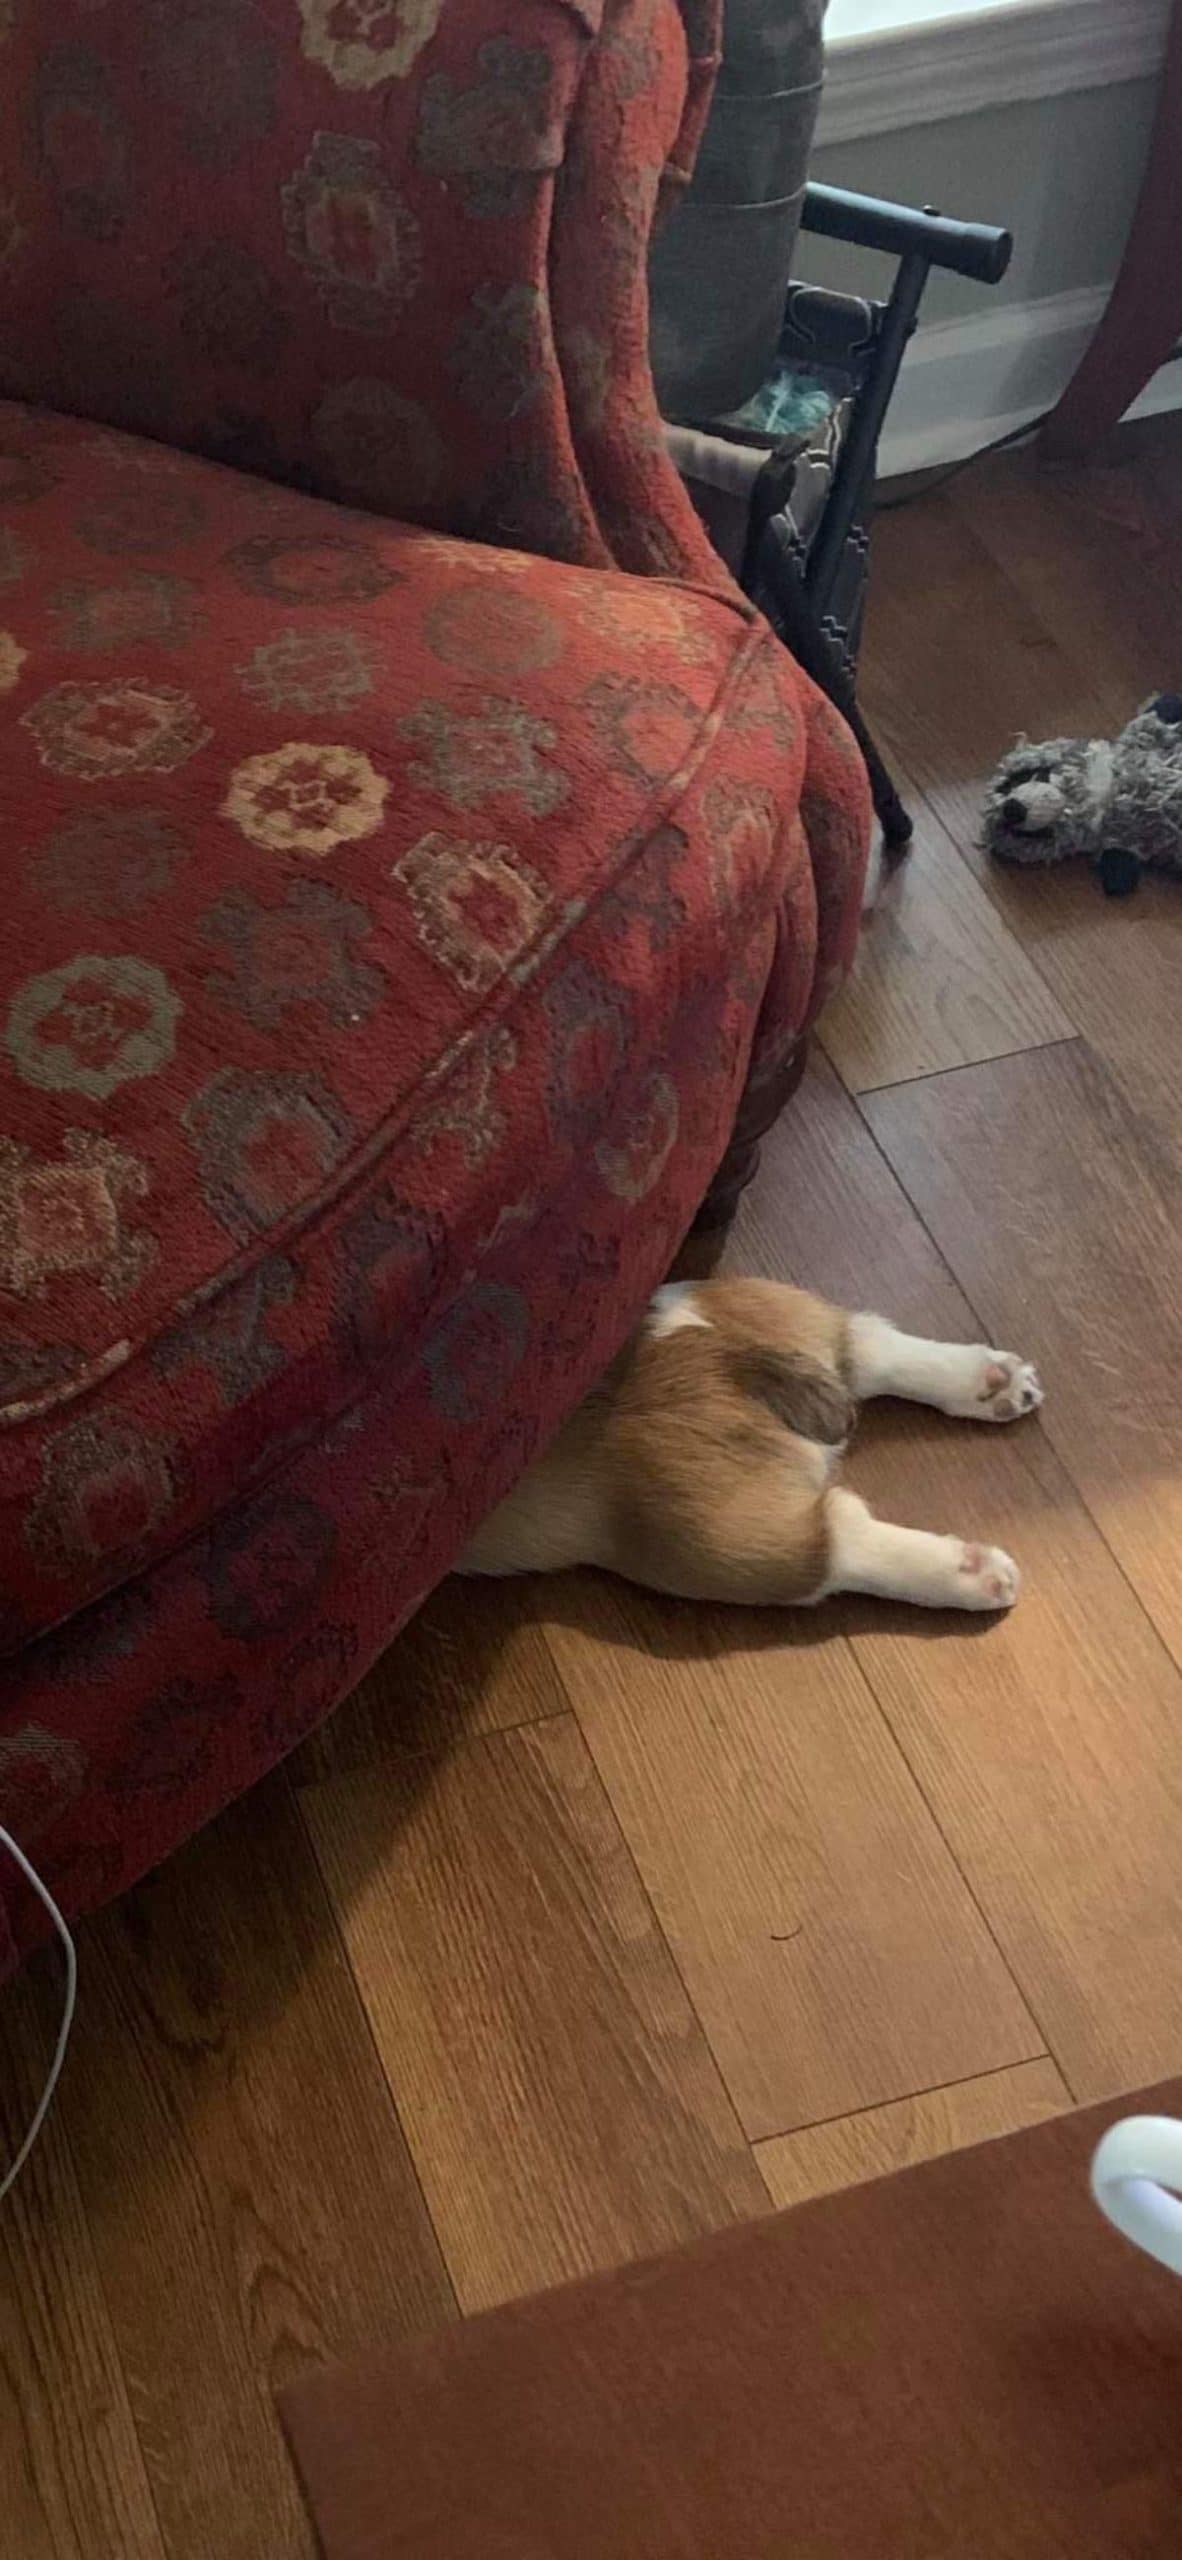 brown and white corgi doing a sploot on the wooden floor with just the butt and back legs showing sticking out from under a red plush chair